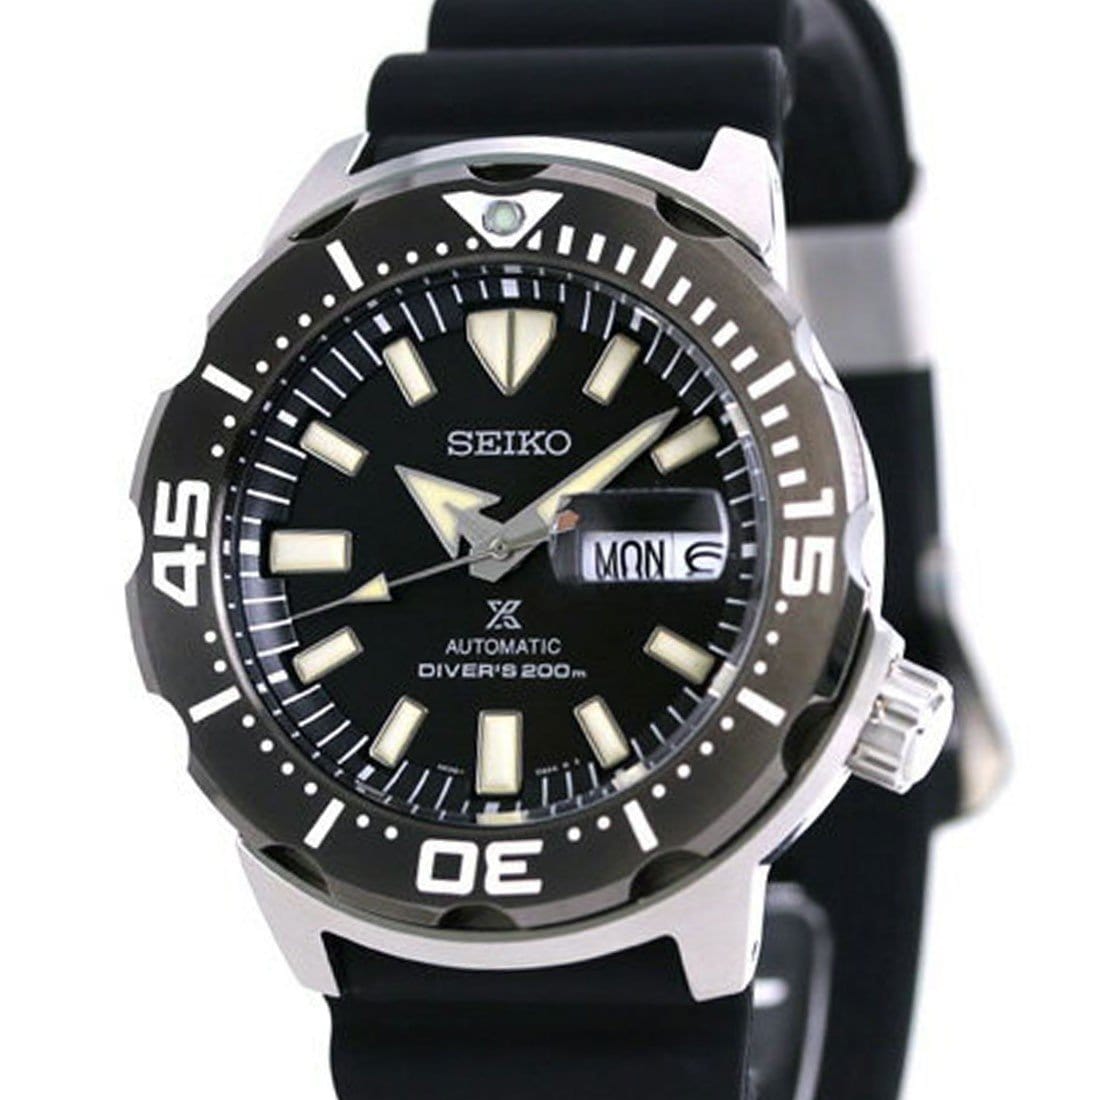 SBDY035 Seiko Prospex Monster 200M Analog Automatic Mens Dive Watch